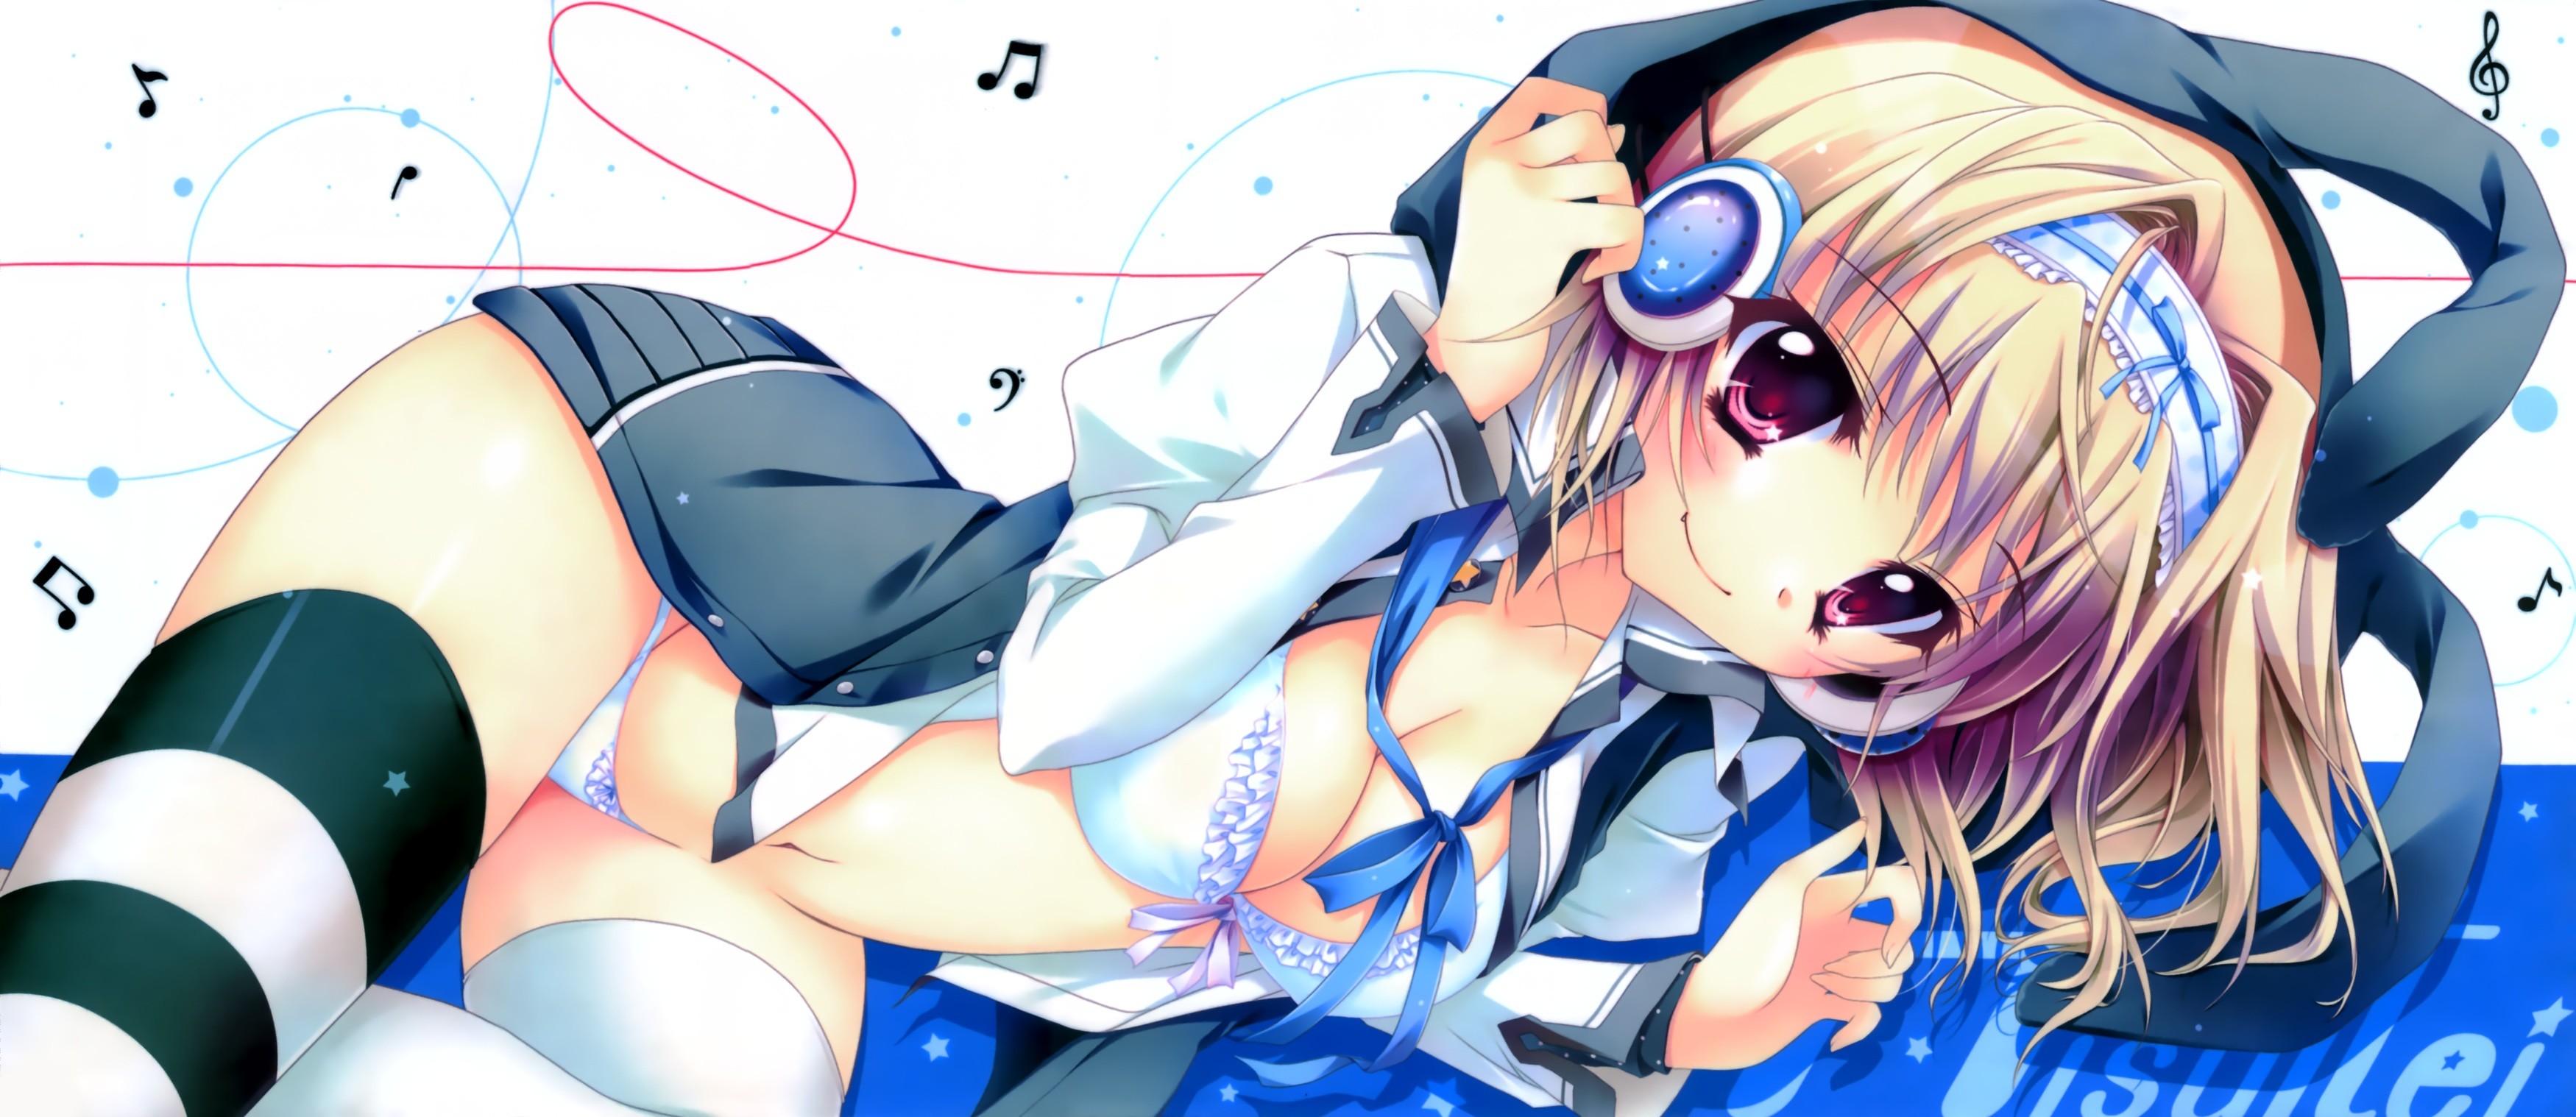 Anime 3500x1518 anime anime girls underwear thigh-highs original characters boobs bra belly panties stockings musical notes striped stockings blue bra smiling blonde